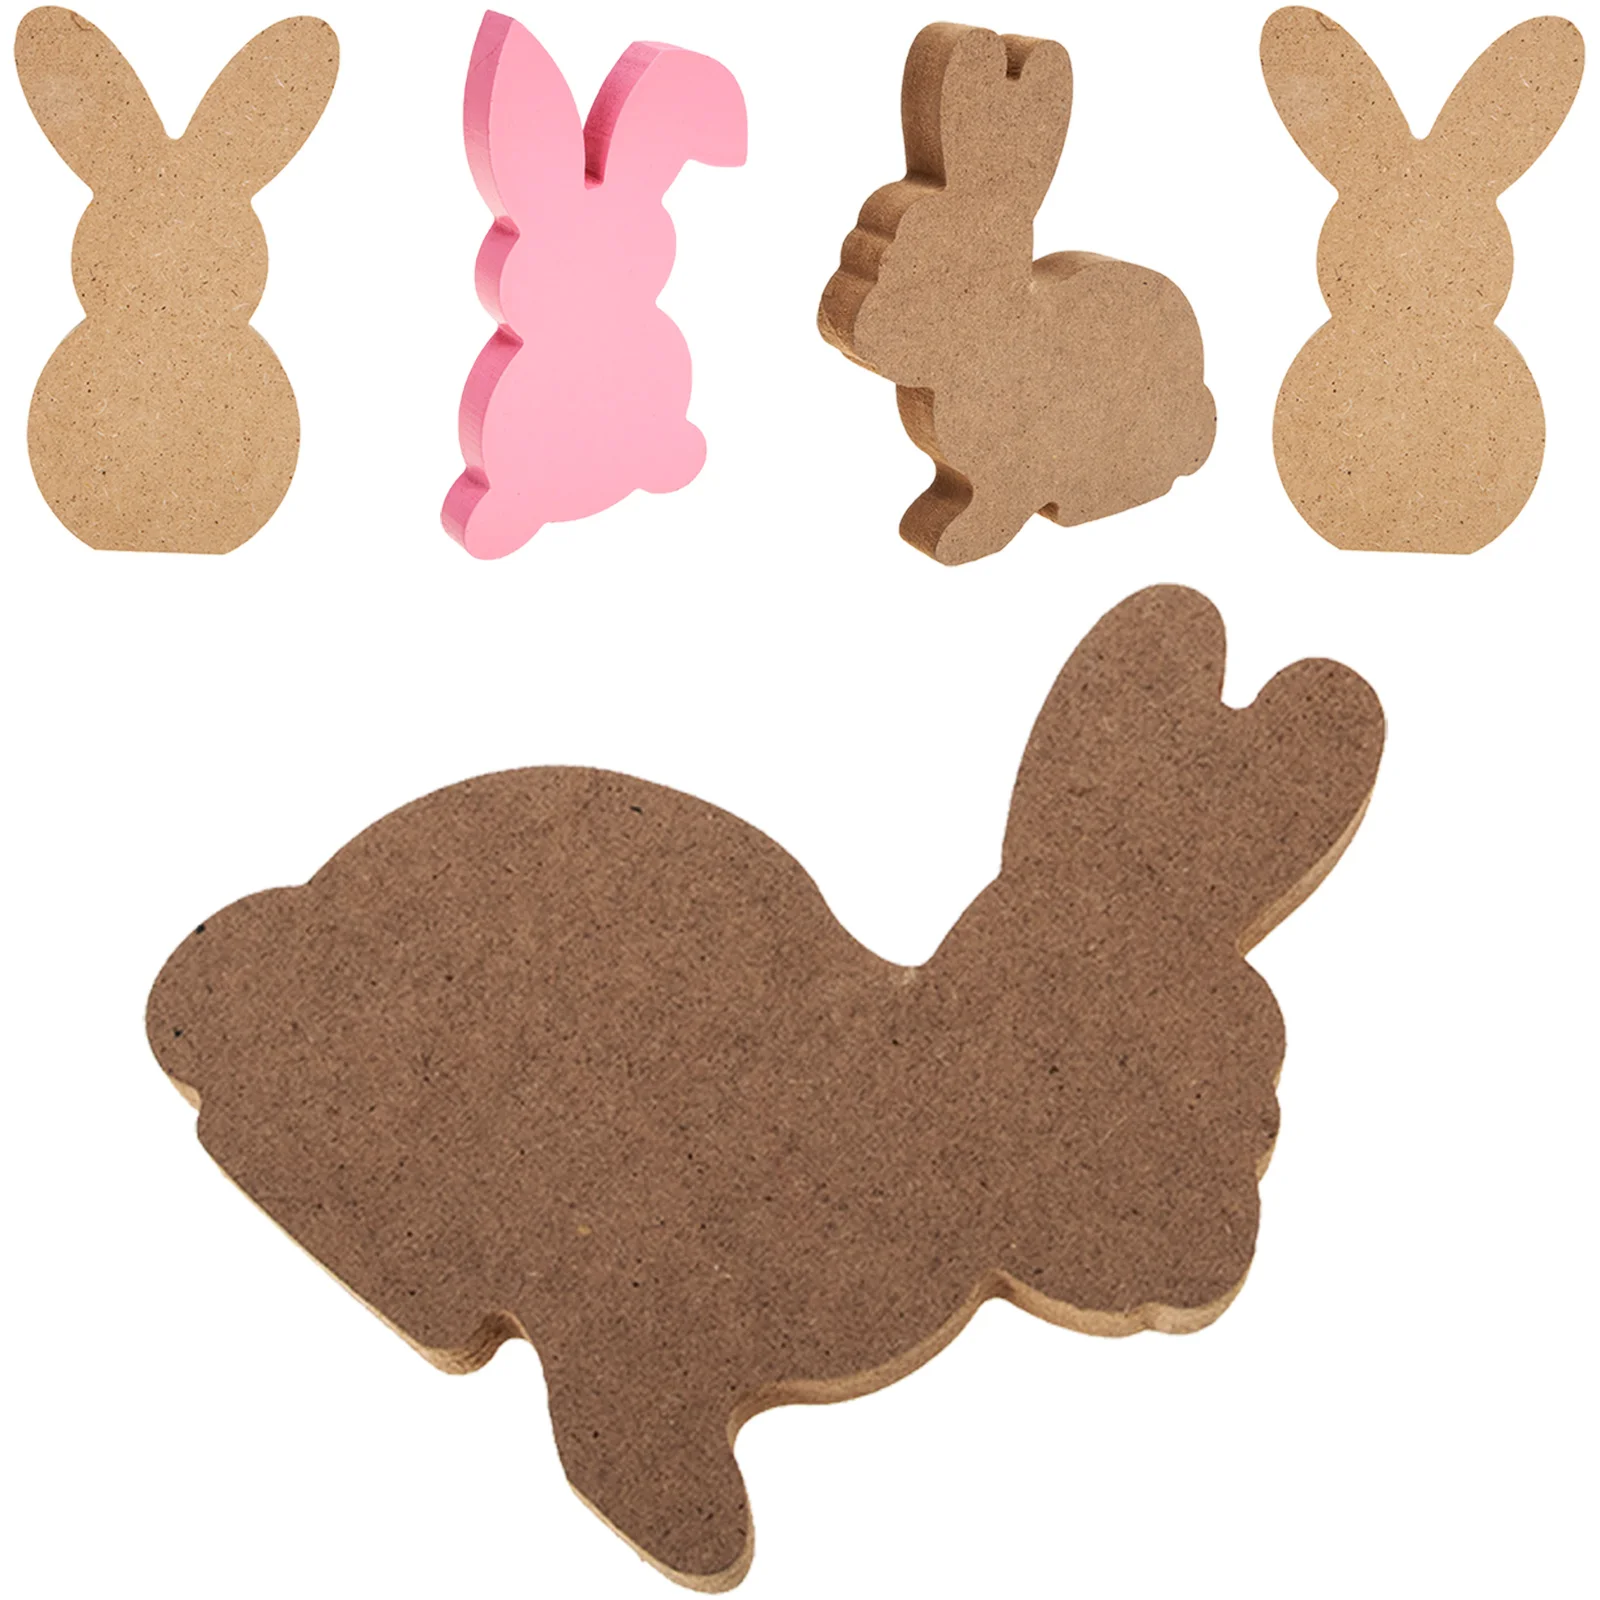 

Easter Decor Bunny Wooden Table Wood Sign Signs Rabbit Ornament Decorations Party Blocks Figurine Home Rustic Farmhouse